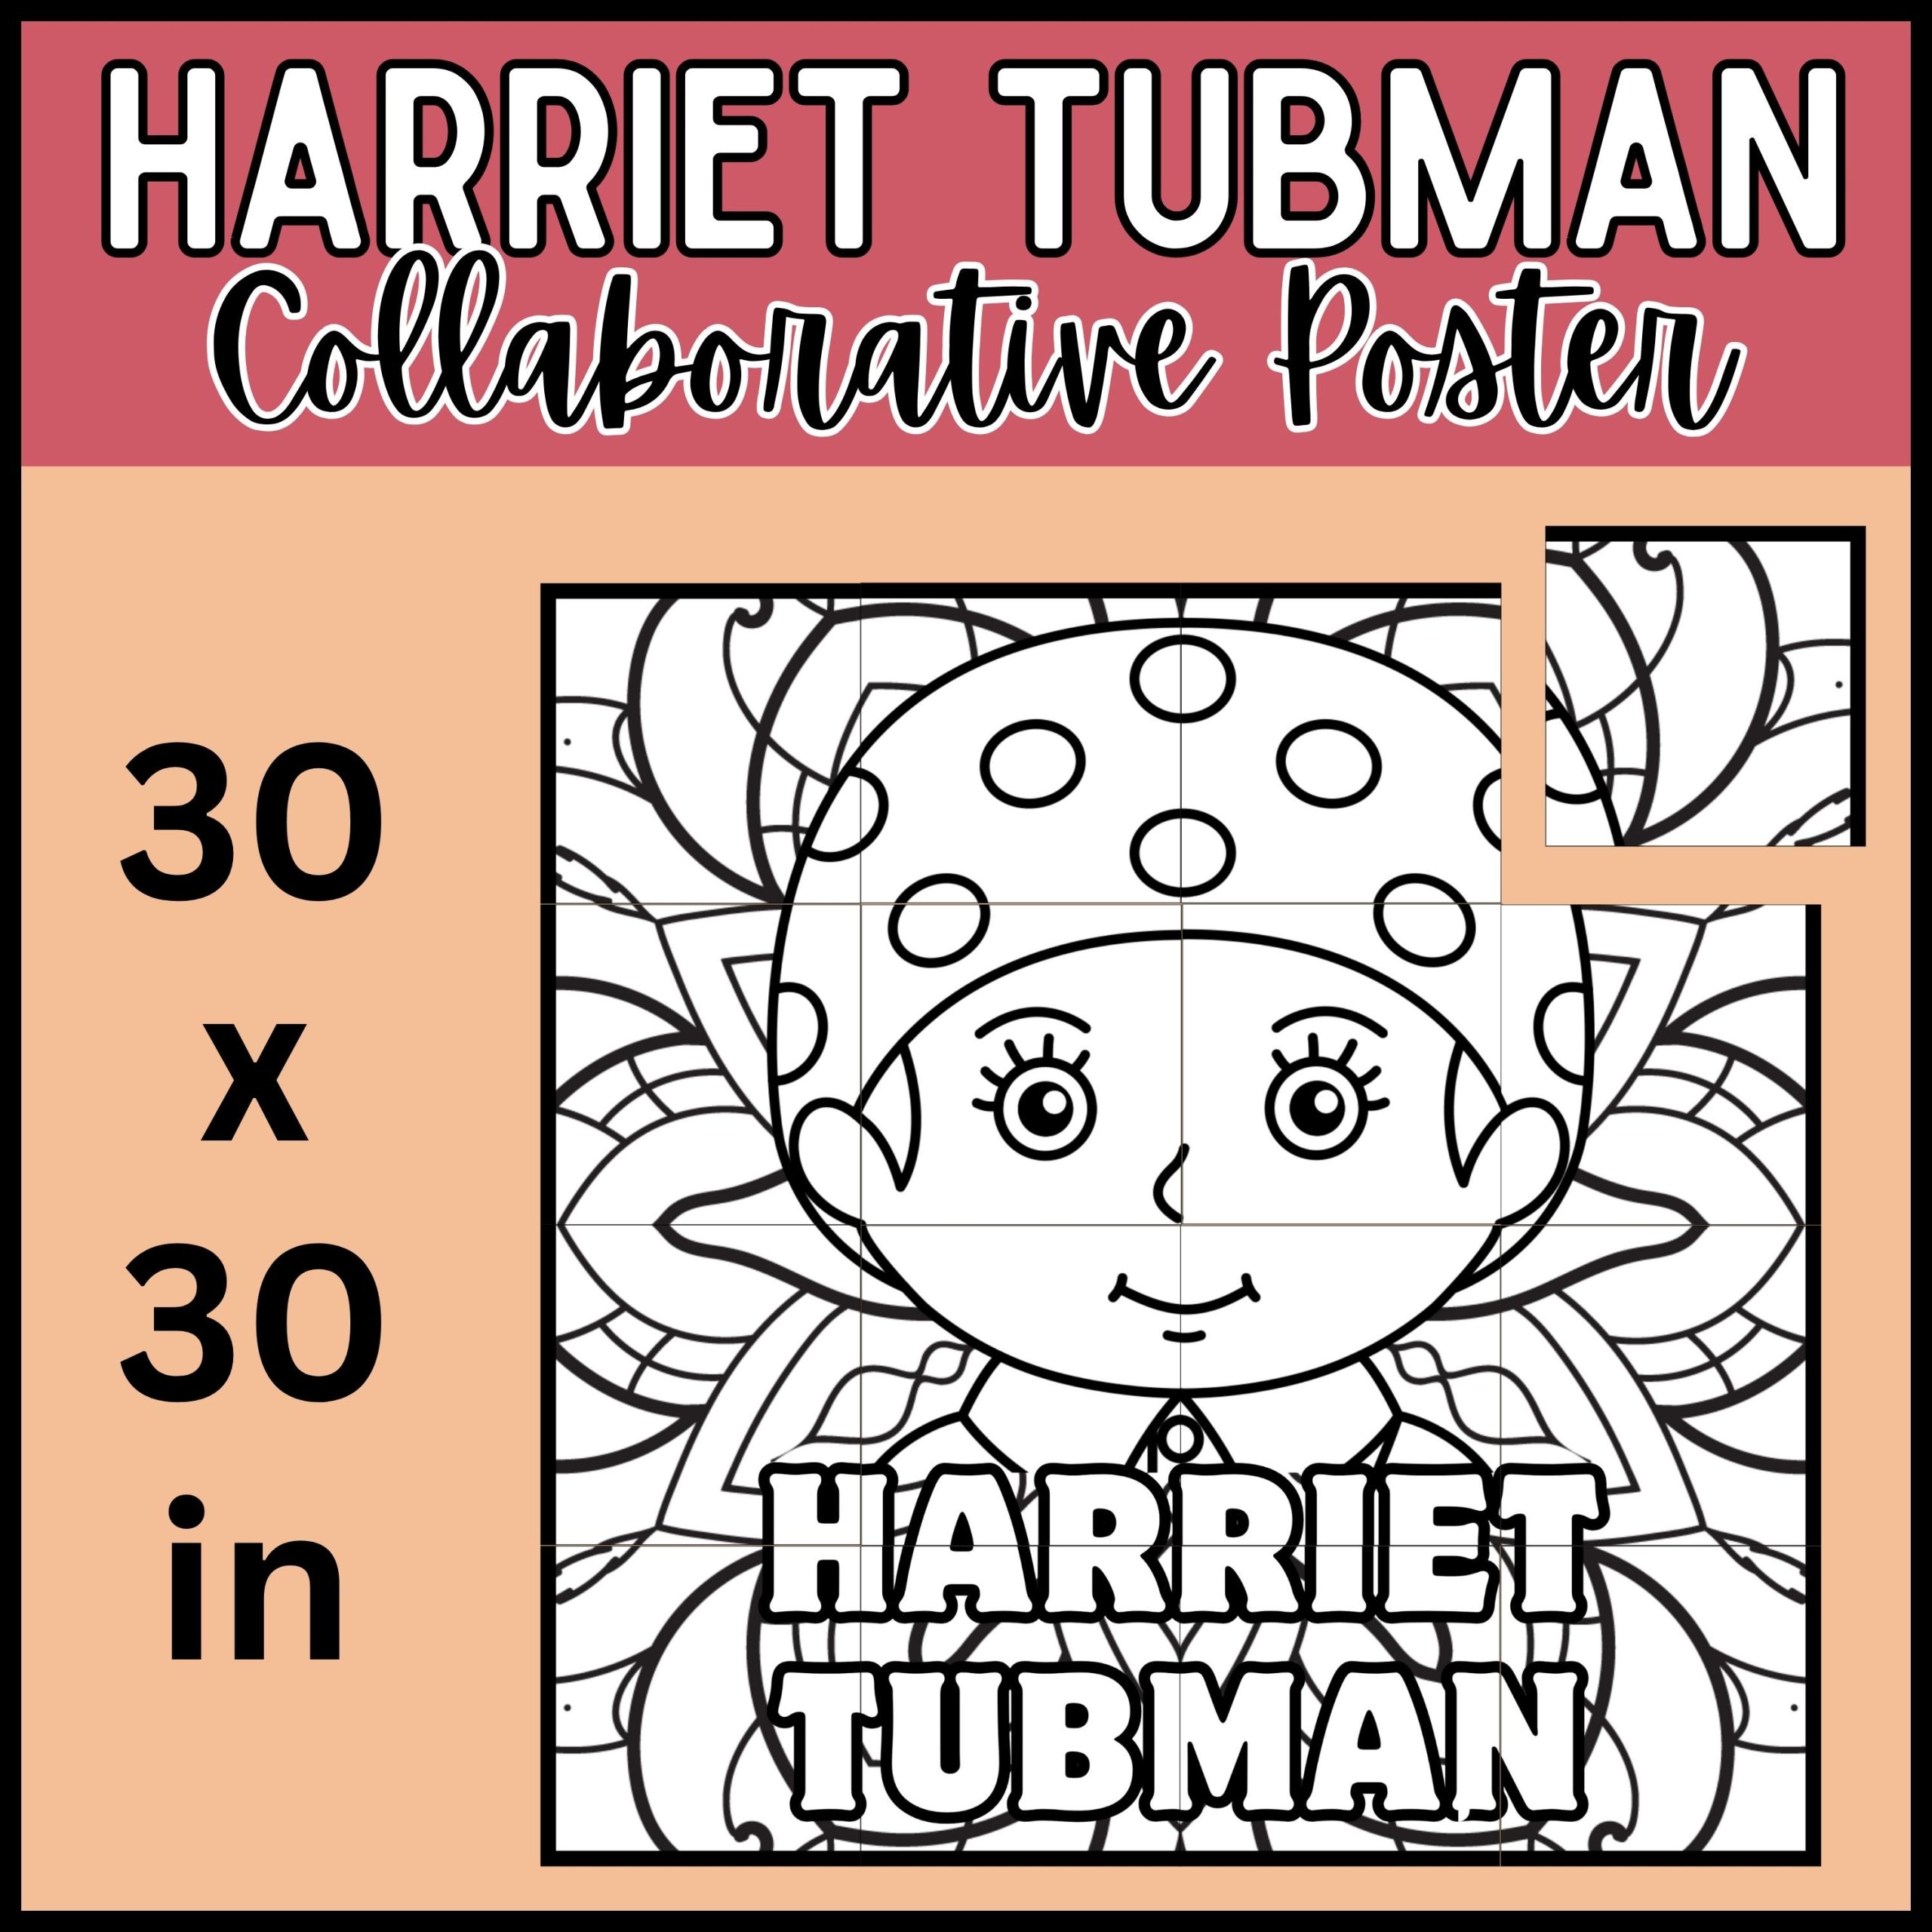 Harriet tubman coloring collaborative poster human rights month leader bhm whm made by teachers